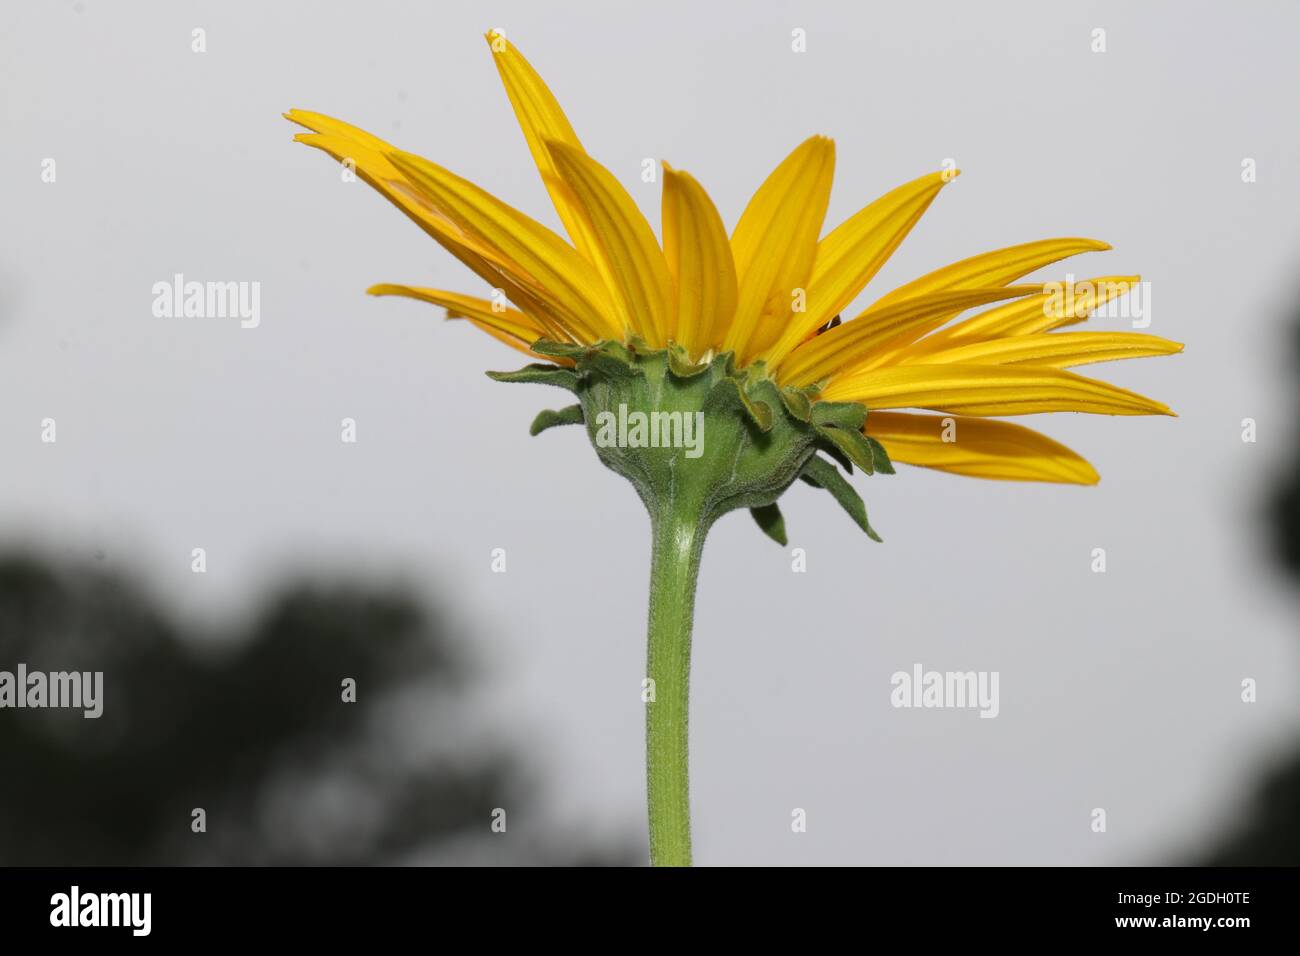 Underside view of flower (false sunflower or ox-eye) in Virginia with sky in background. Stock Photo